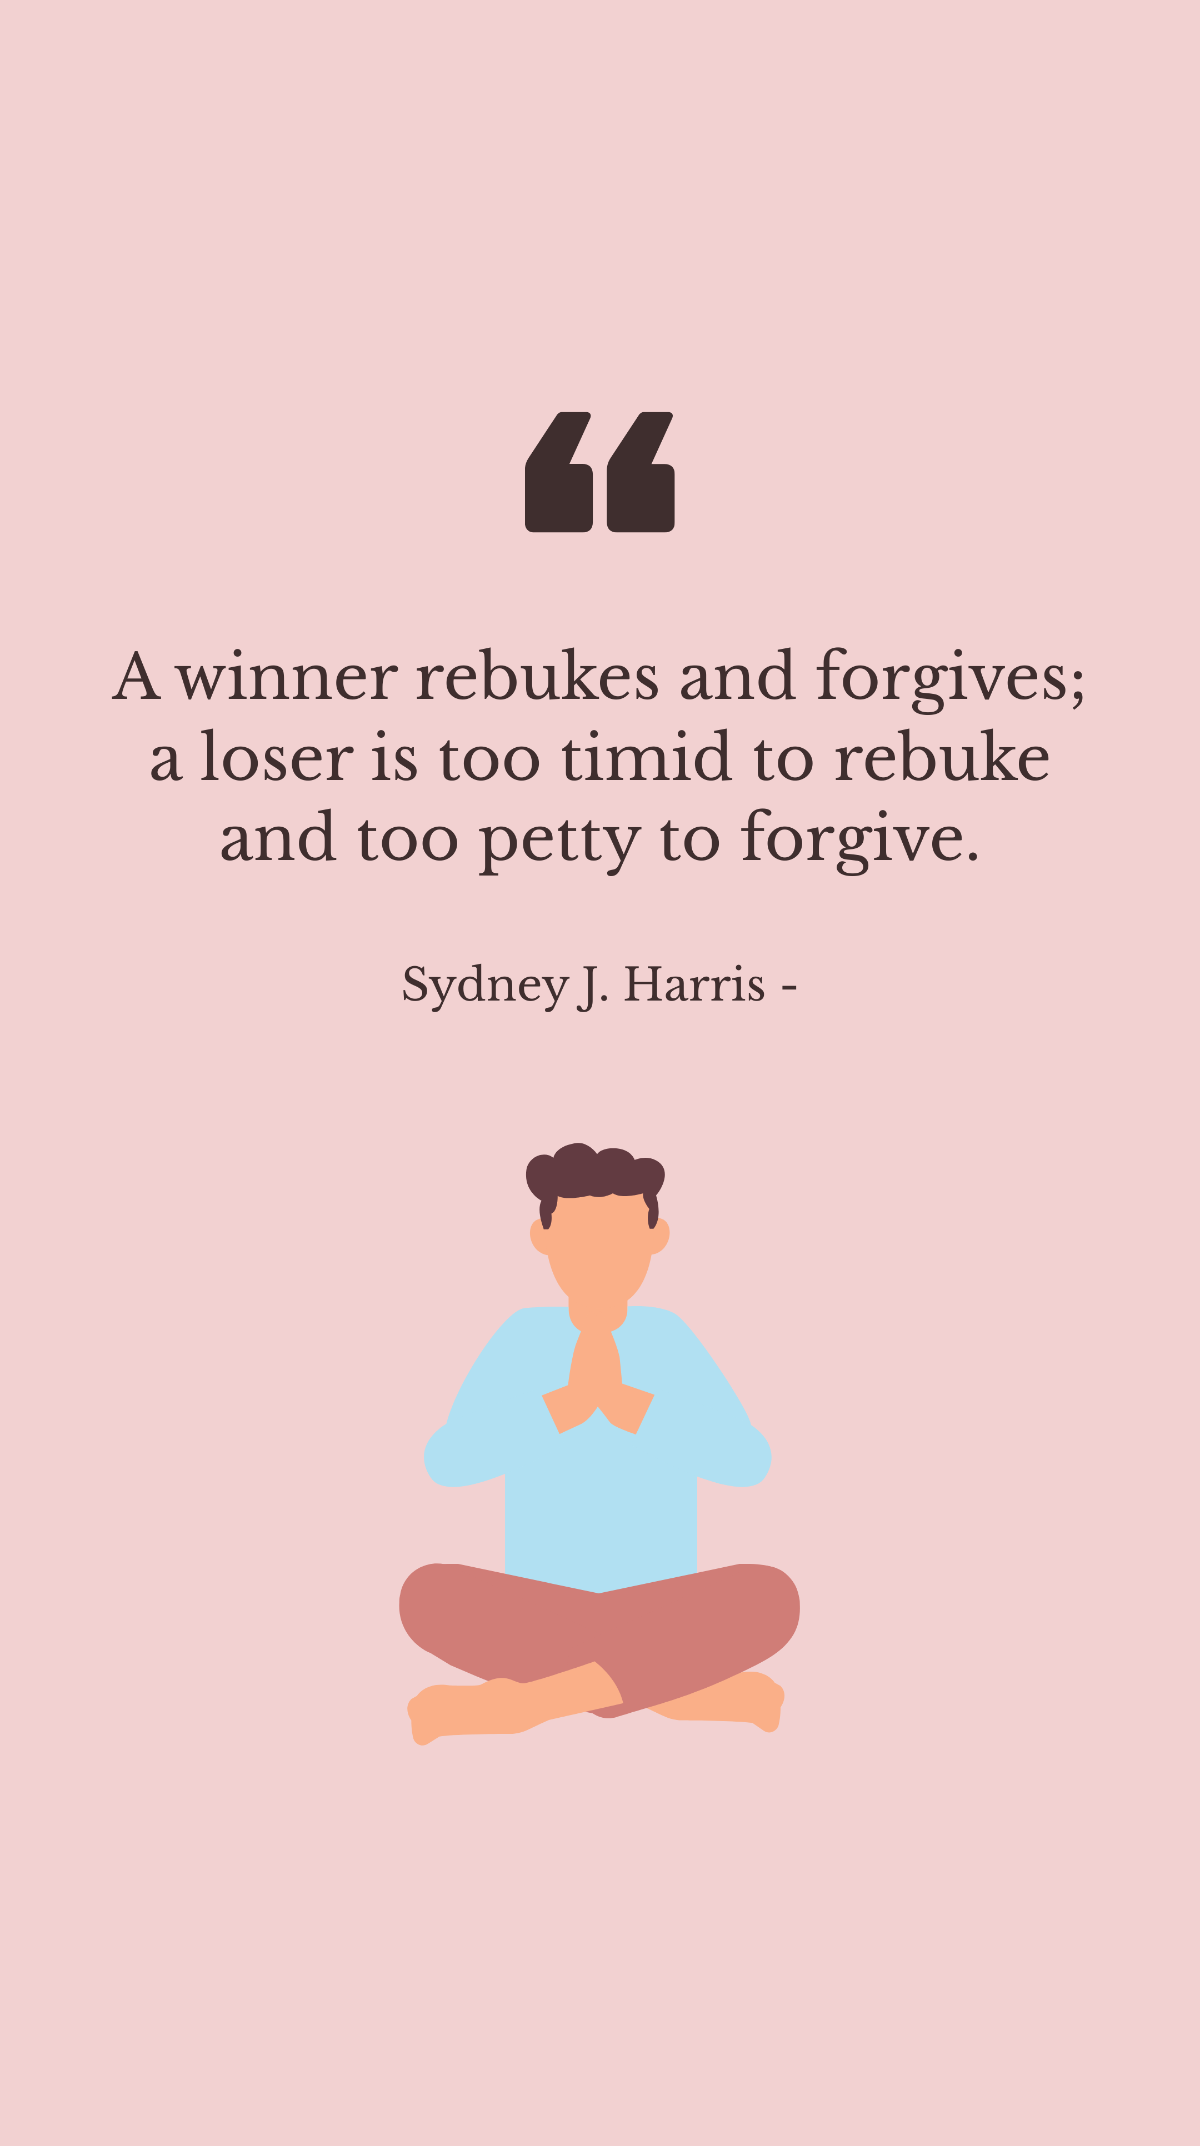 Sydney J. Harris - A winner rebukes and forgives; a loser is too timid to rebuke and too petty to forgive.